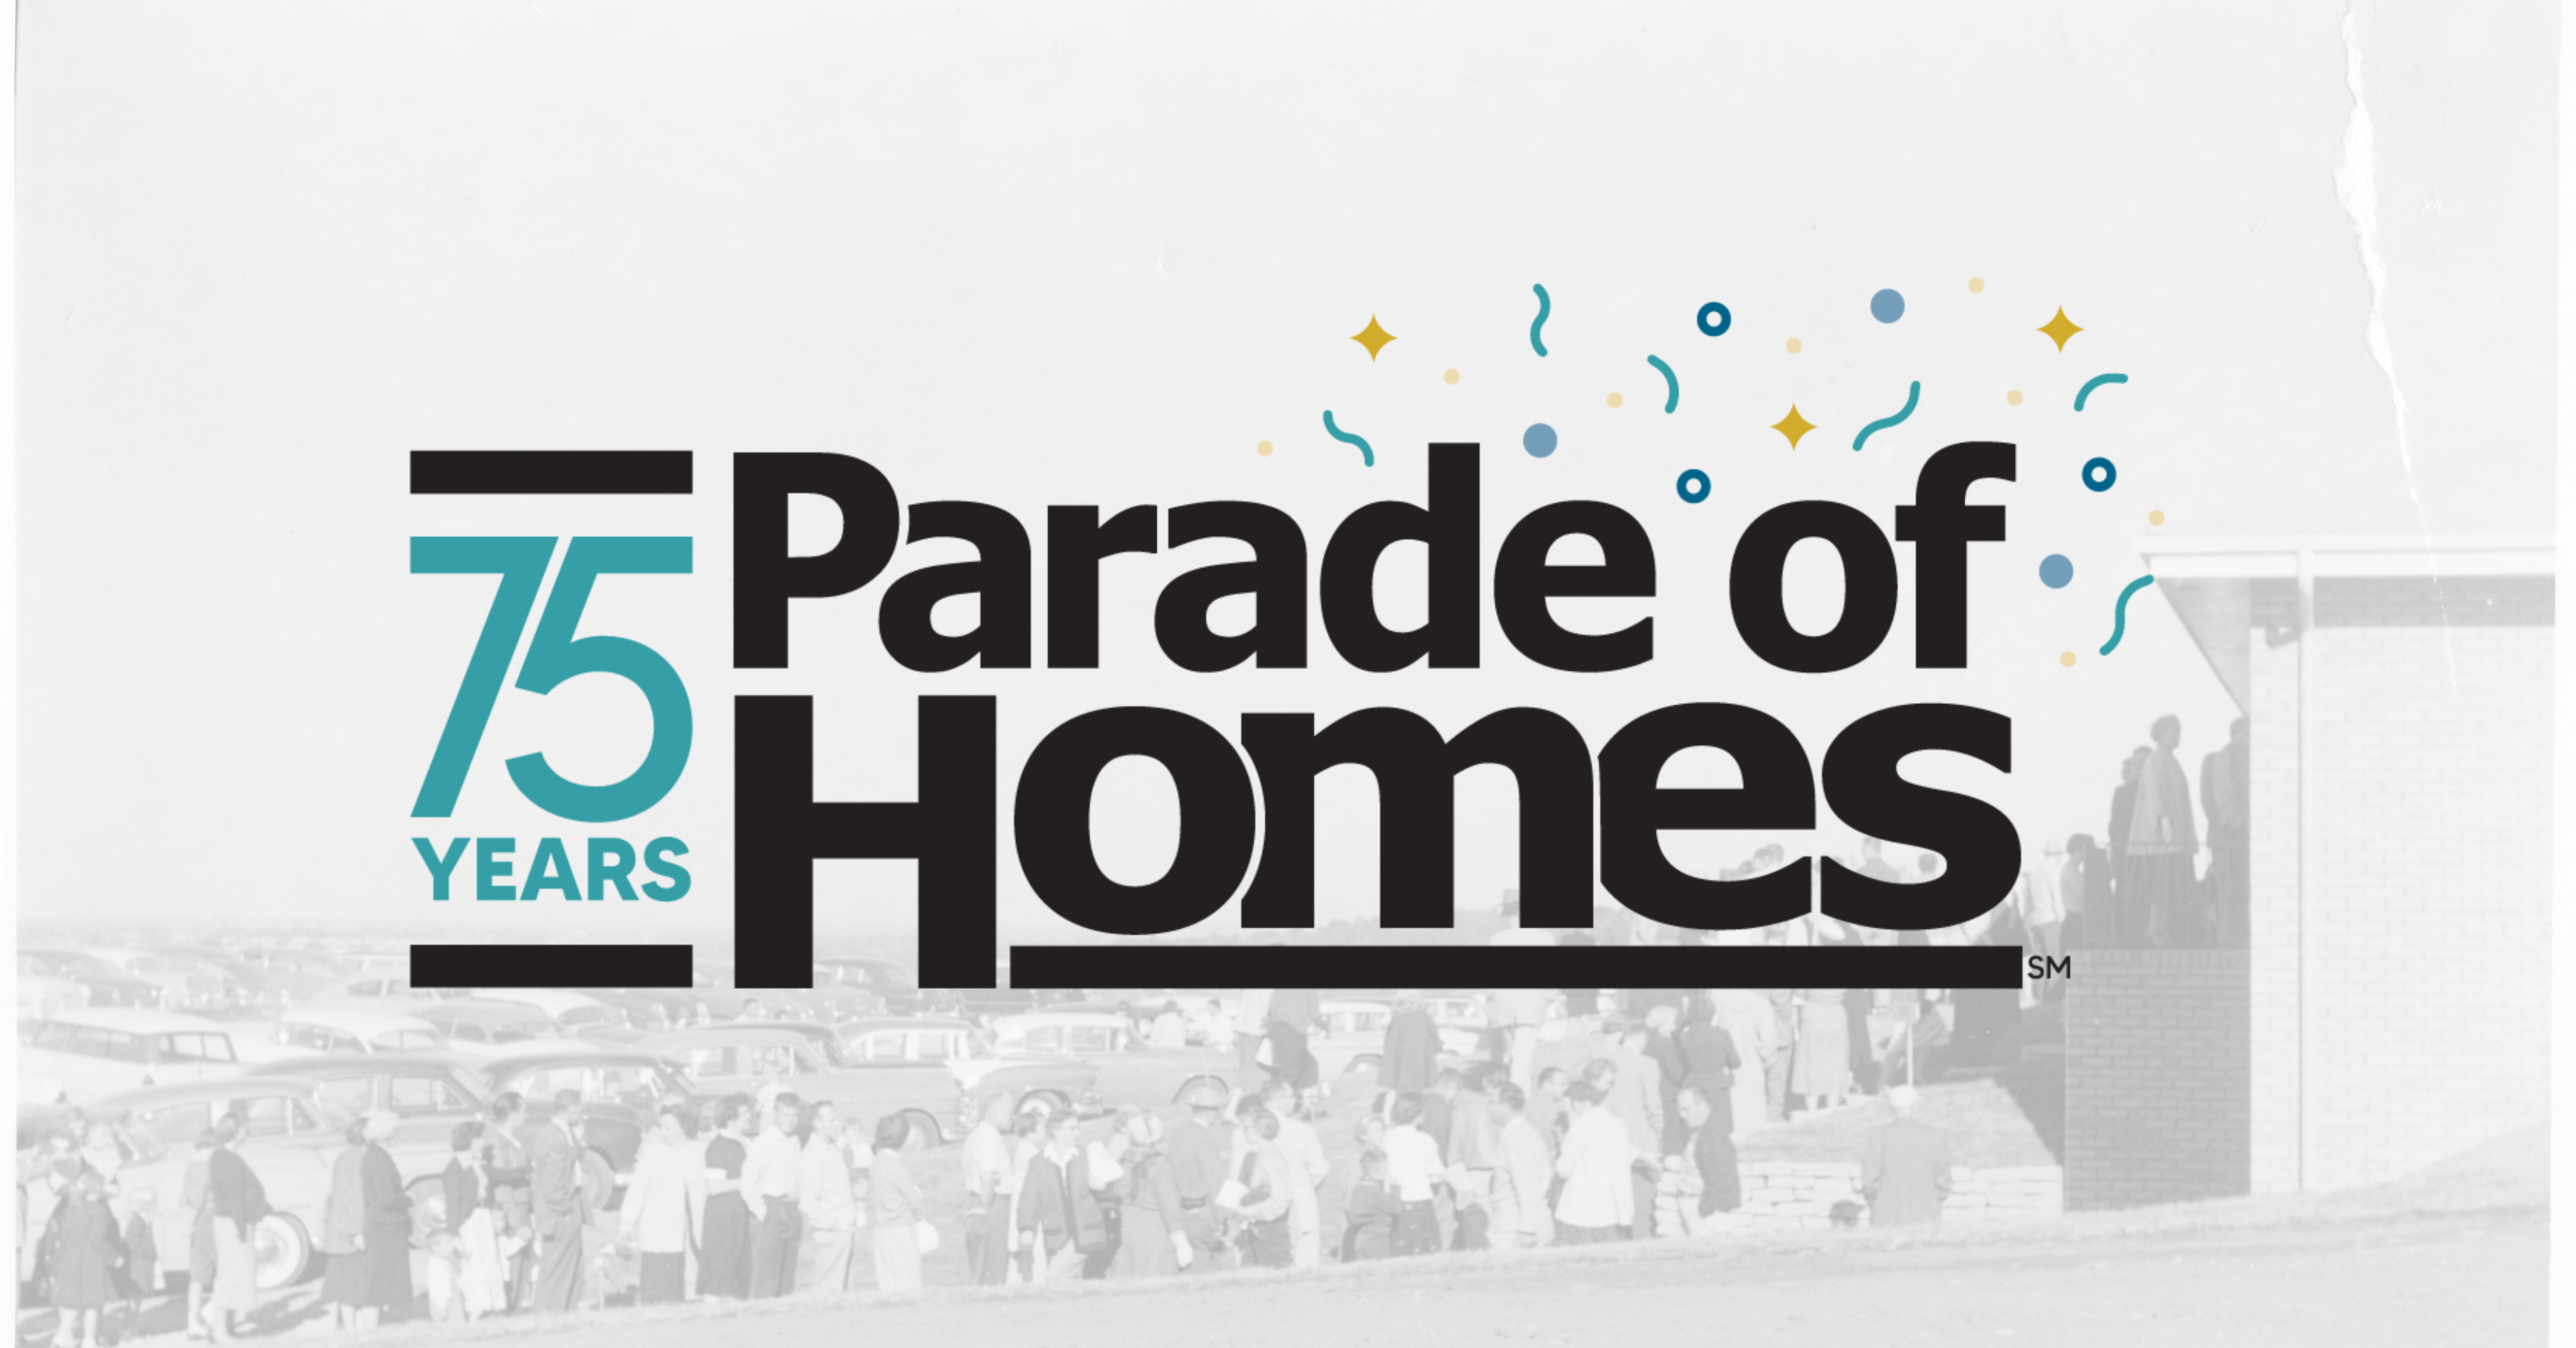 Image for Parade of Homes marks 75 years of celebrating homeownership